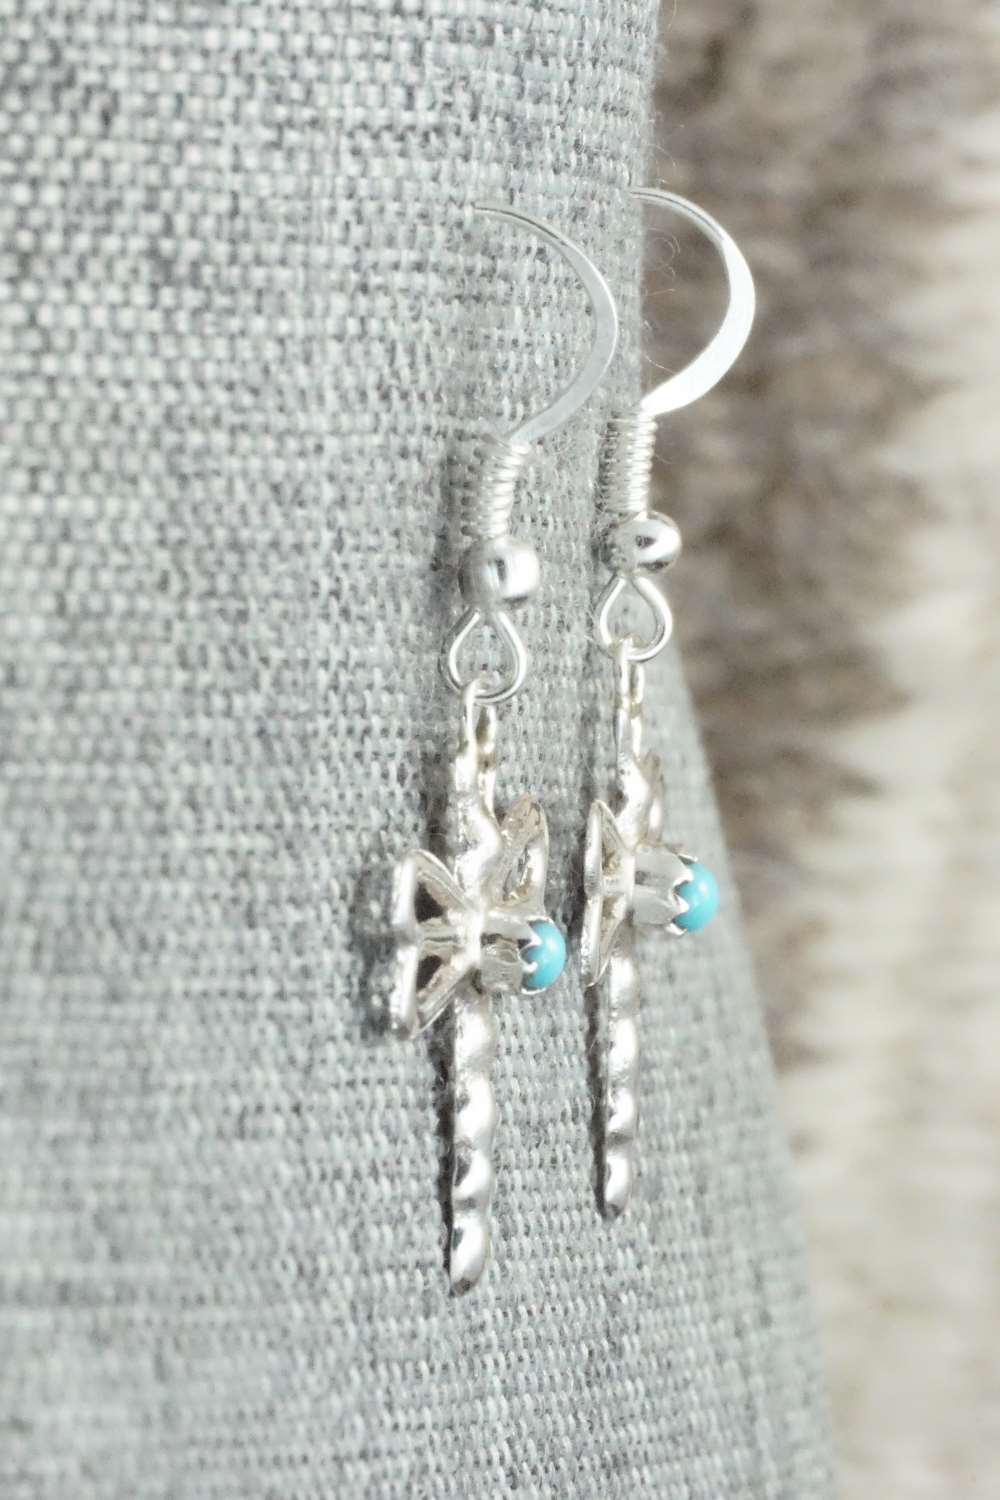 Turquoise & Sterling Silver Earrings - Bruce Chee